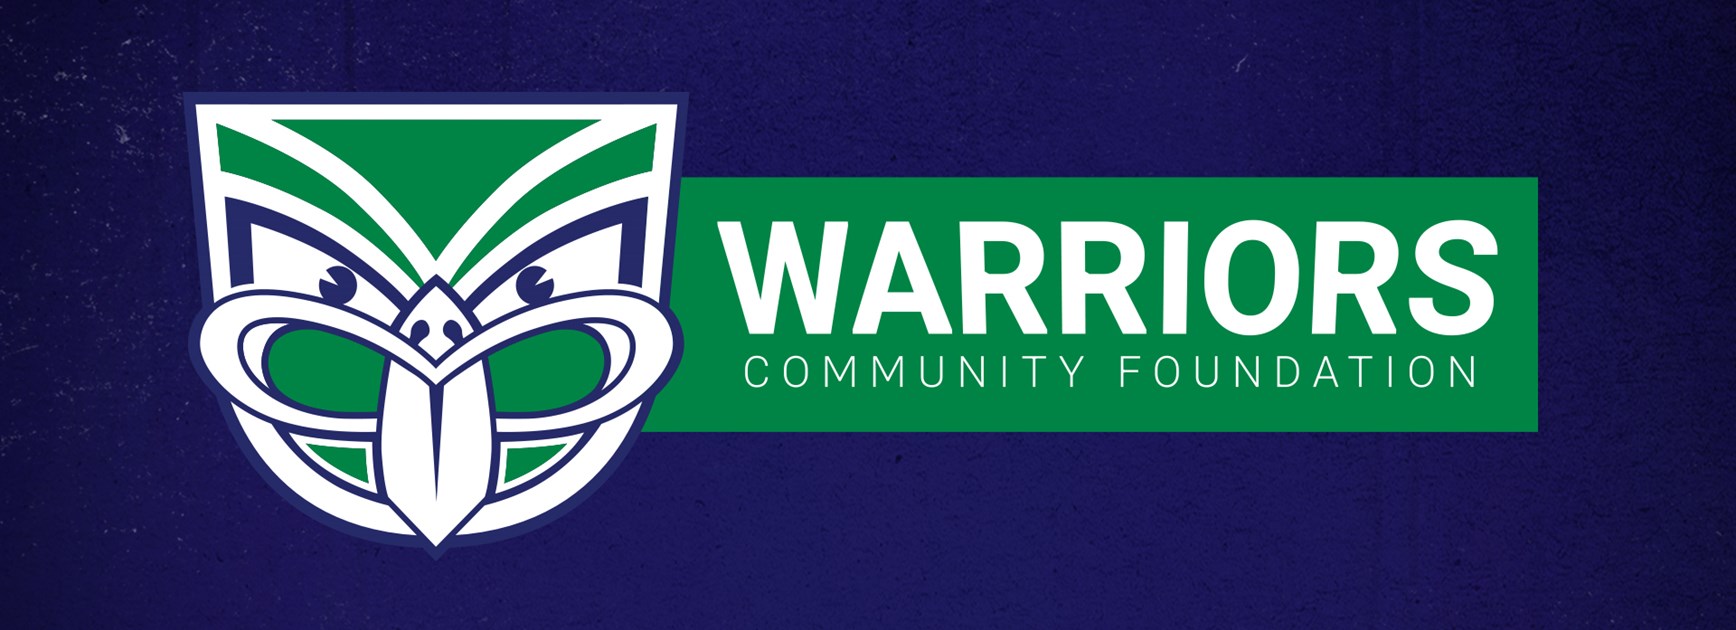 Not-for-profit Warriors Community Foundation formed